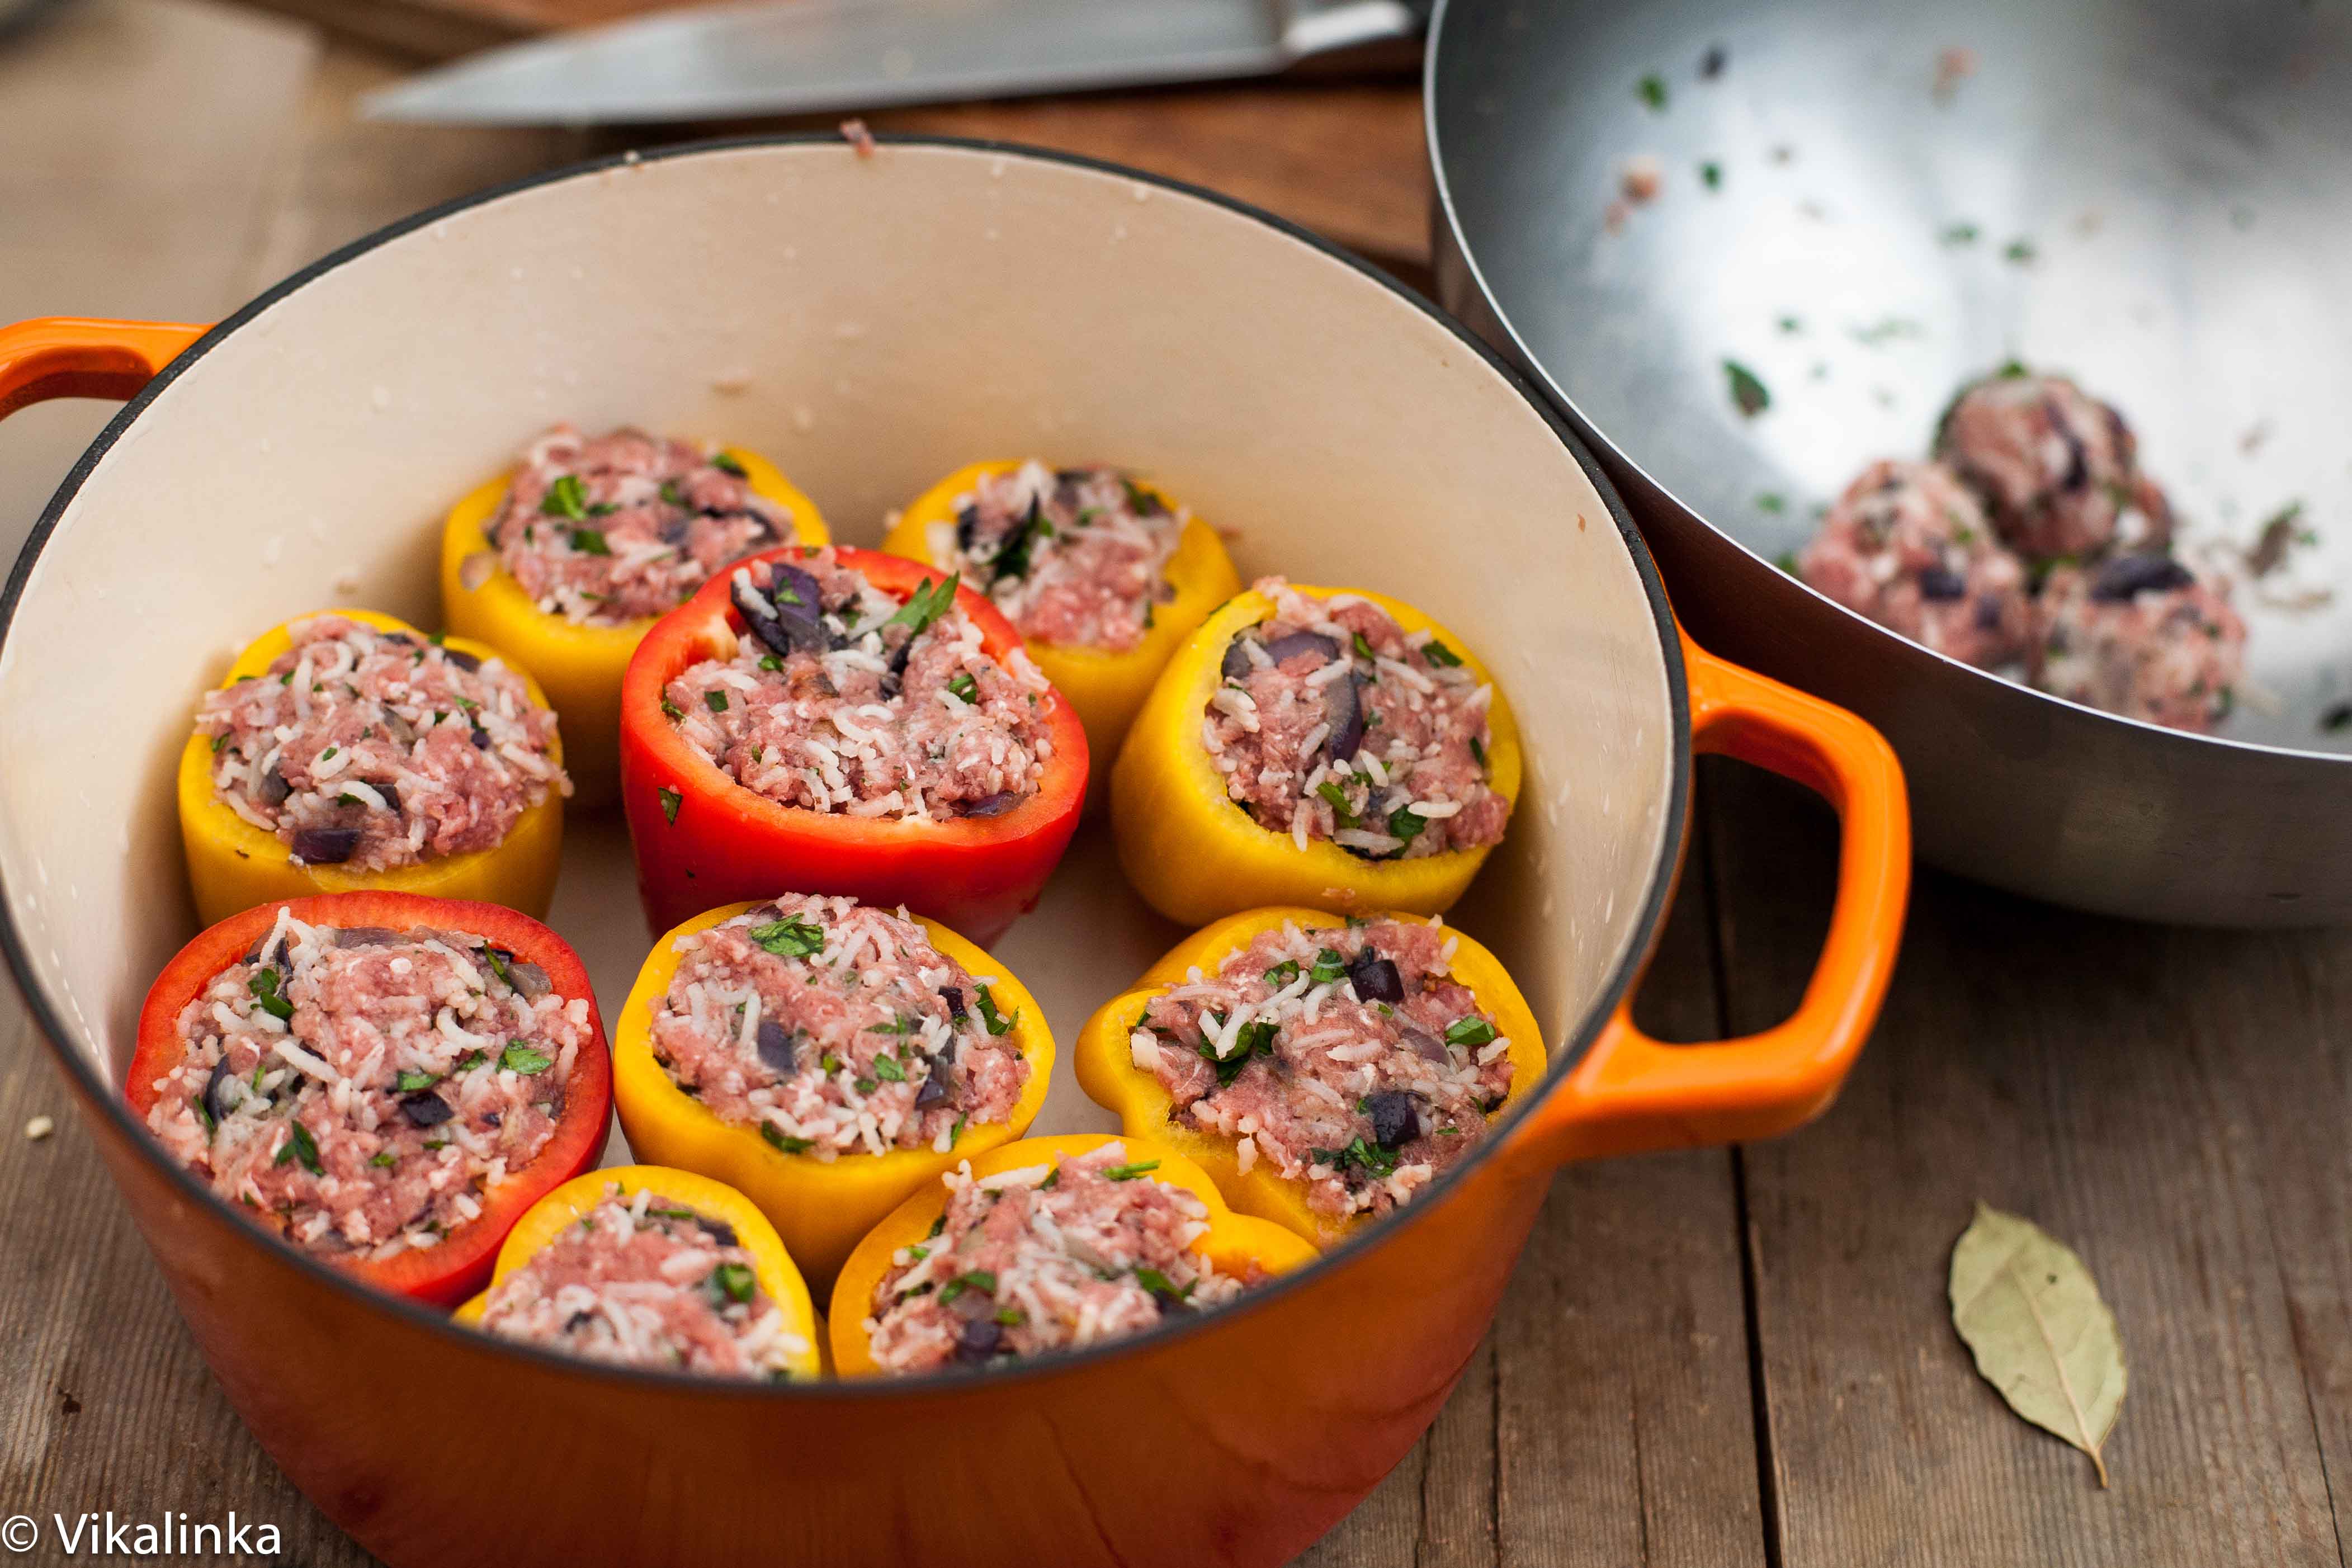 Stuffed Bell Peppers with Smoky Paprika Sauce